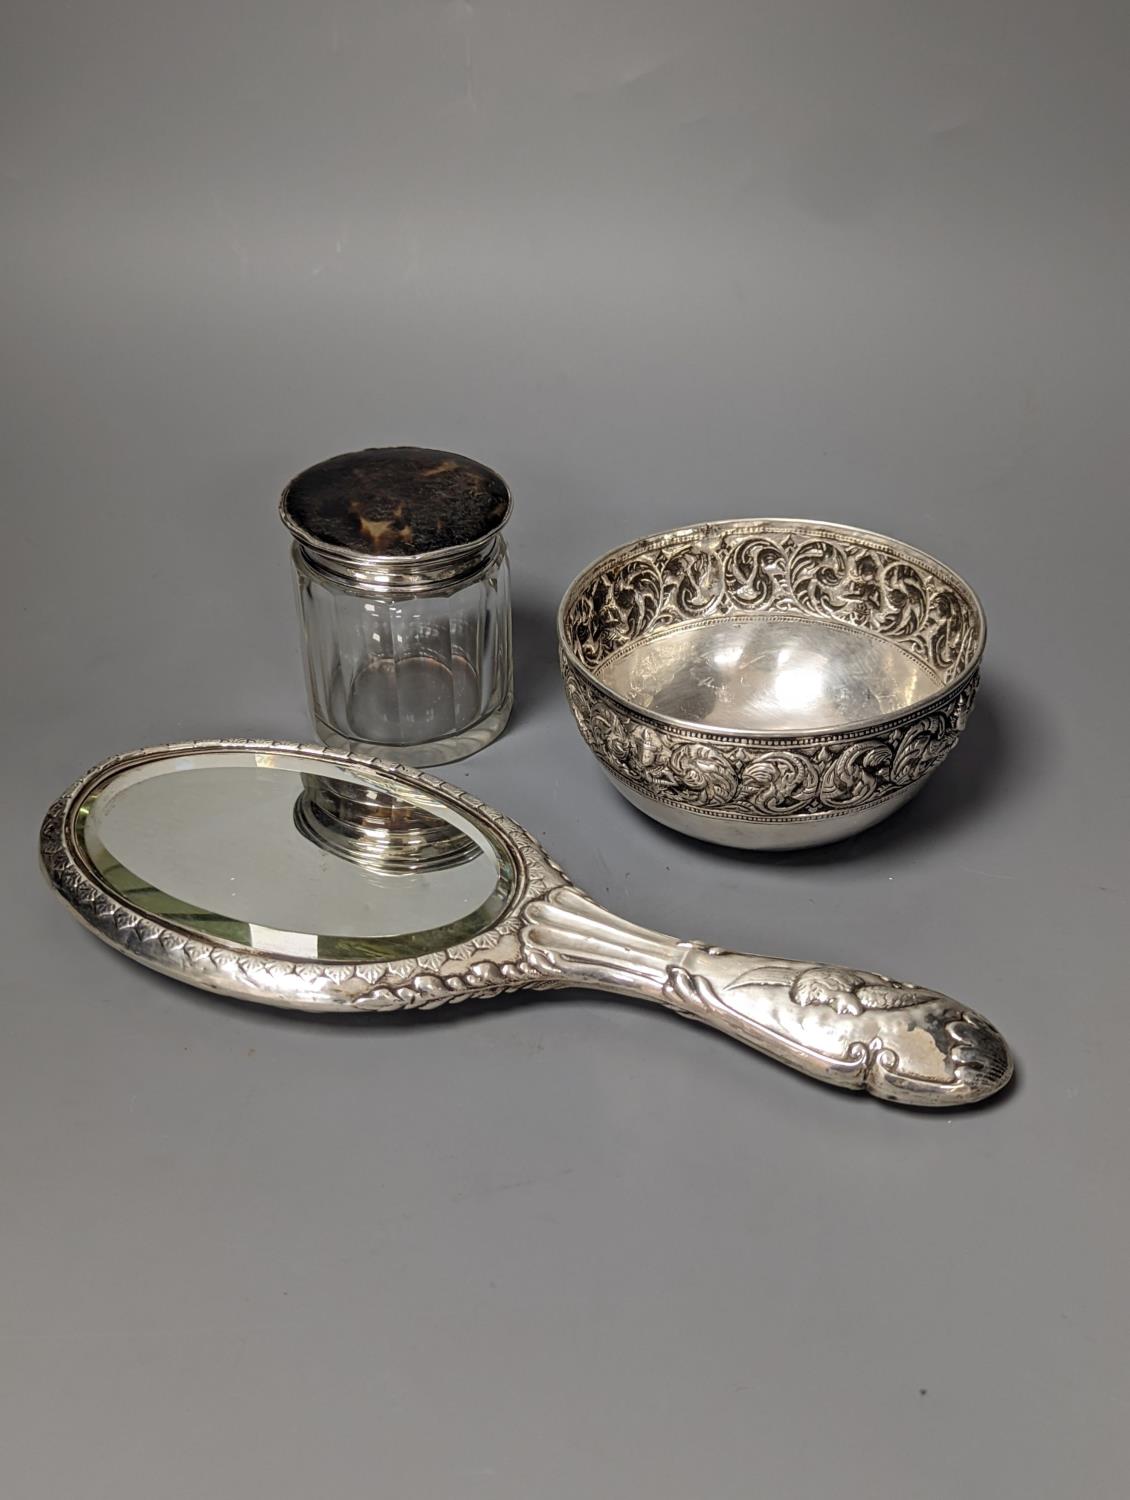 An Edwardian silver mounted 'Reynold's Angels' hand mirror, a silver and tortoiseshell lidded - Image 2 of 2